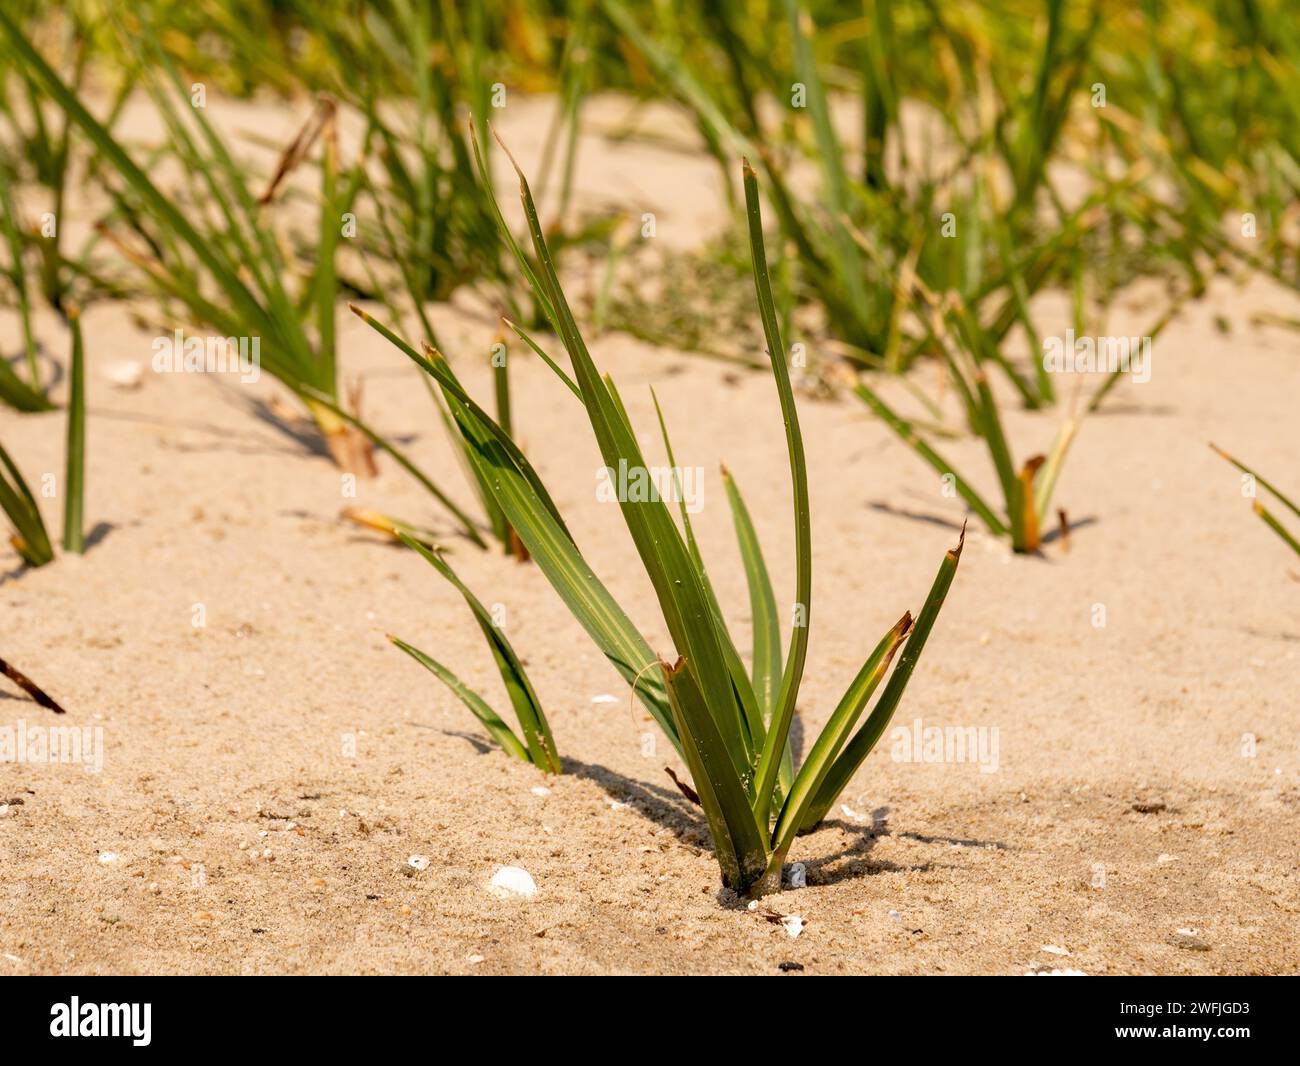 Common cordgrass, Spartina anglica, young plant on sandflat of tidal flat at low tide, Kwade Hoek, Goeree, Zuid-Holland, Netherlands Stock Photo